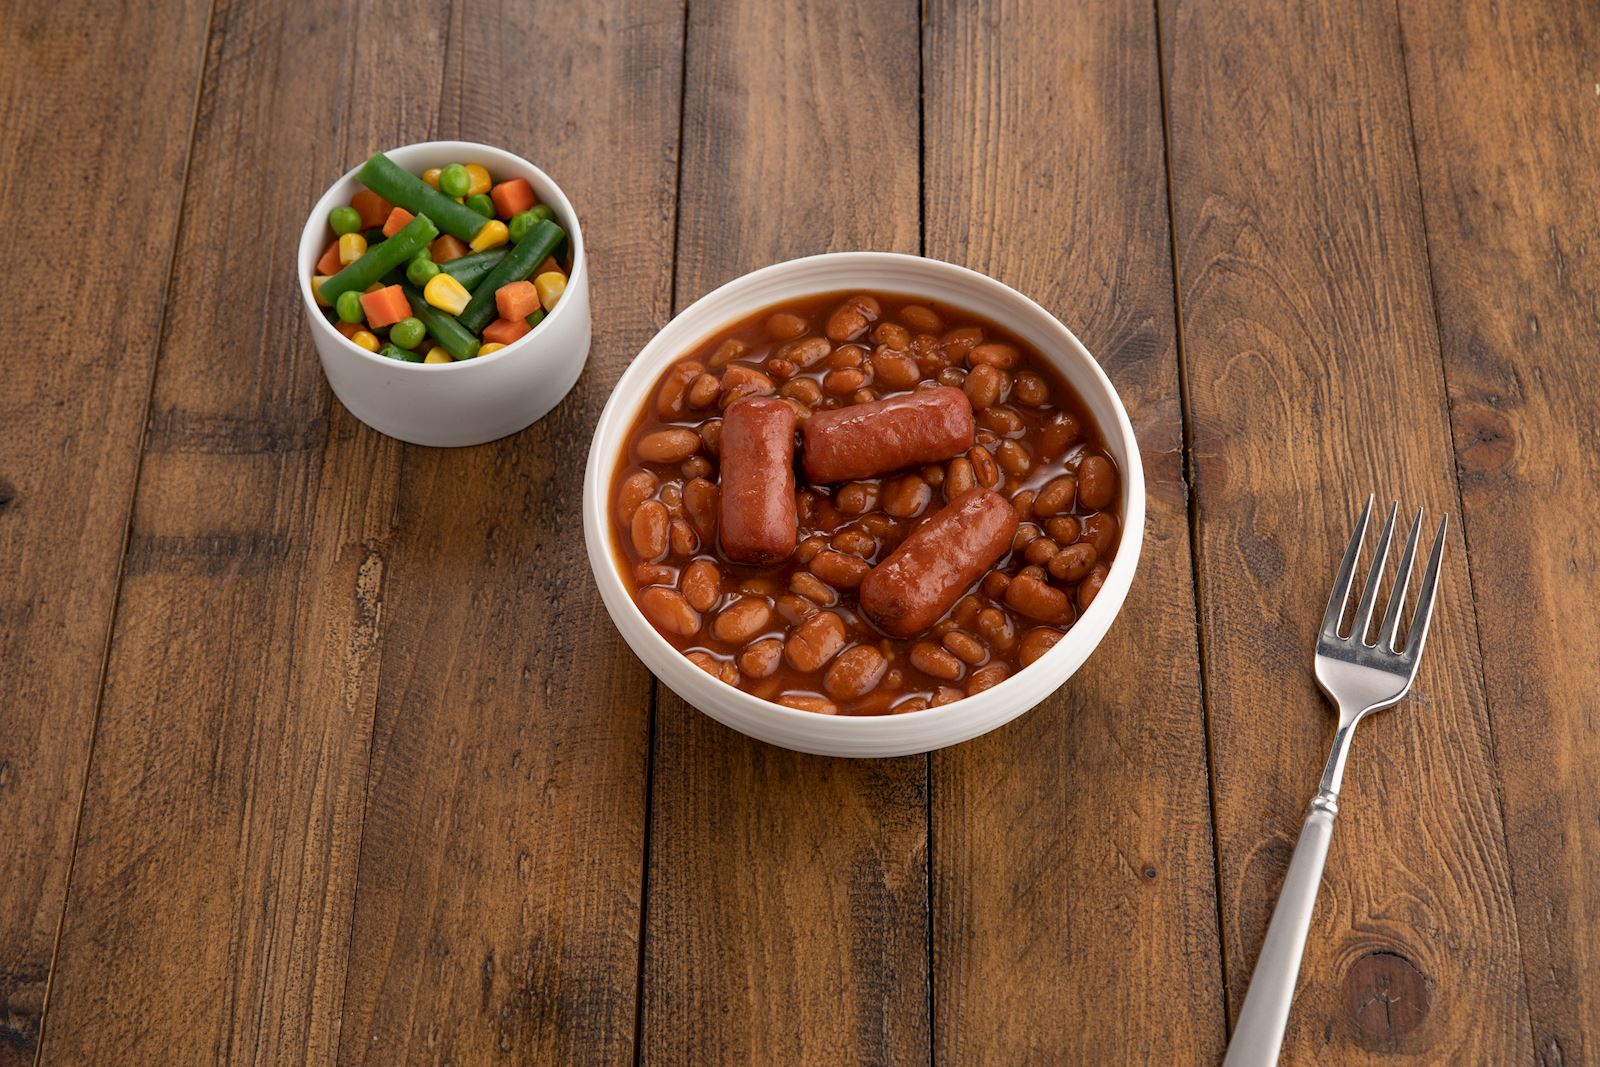 Beef Little Smokies with Baked Beans and Seasoned Vegetables